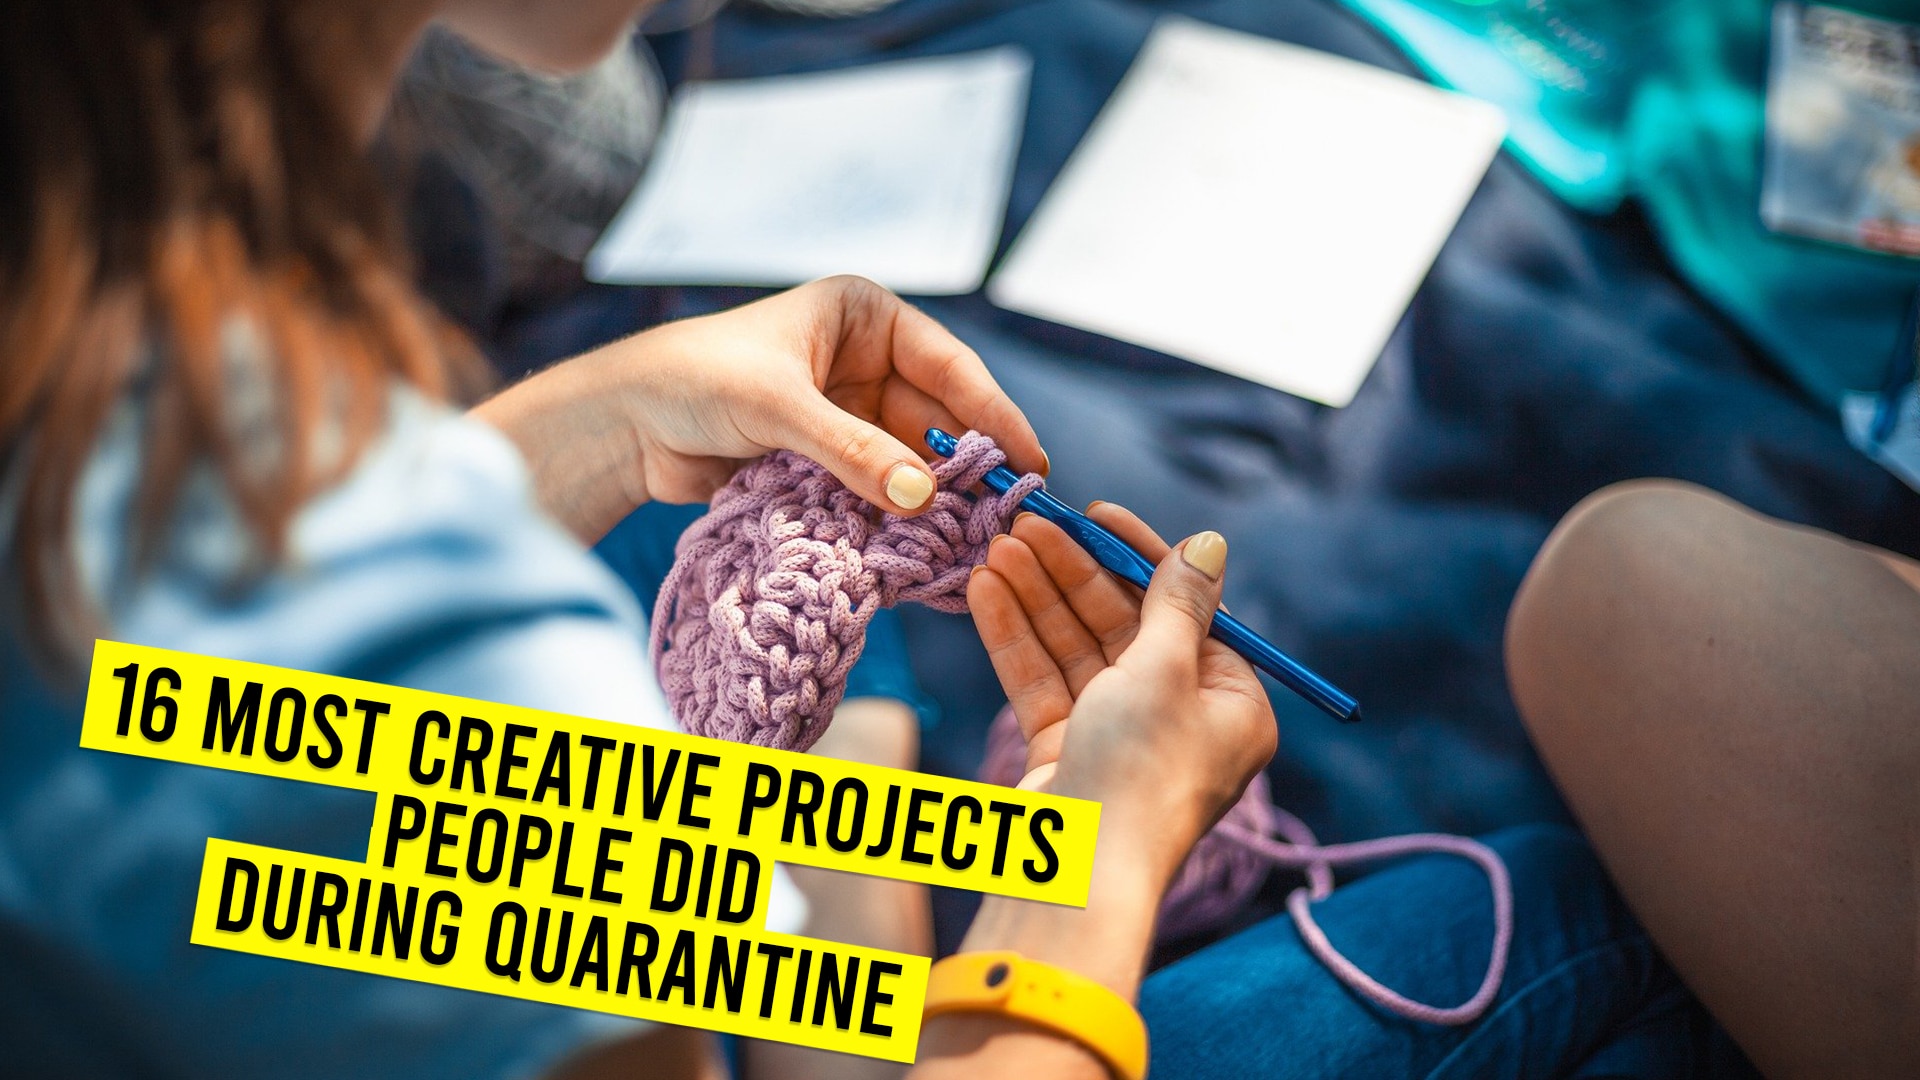 16 Most creative Projects People did during Quarantine.